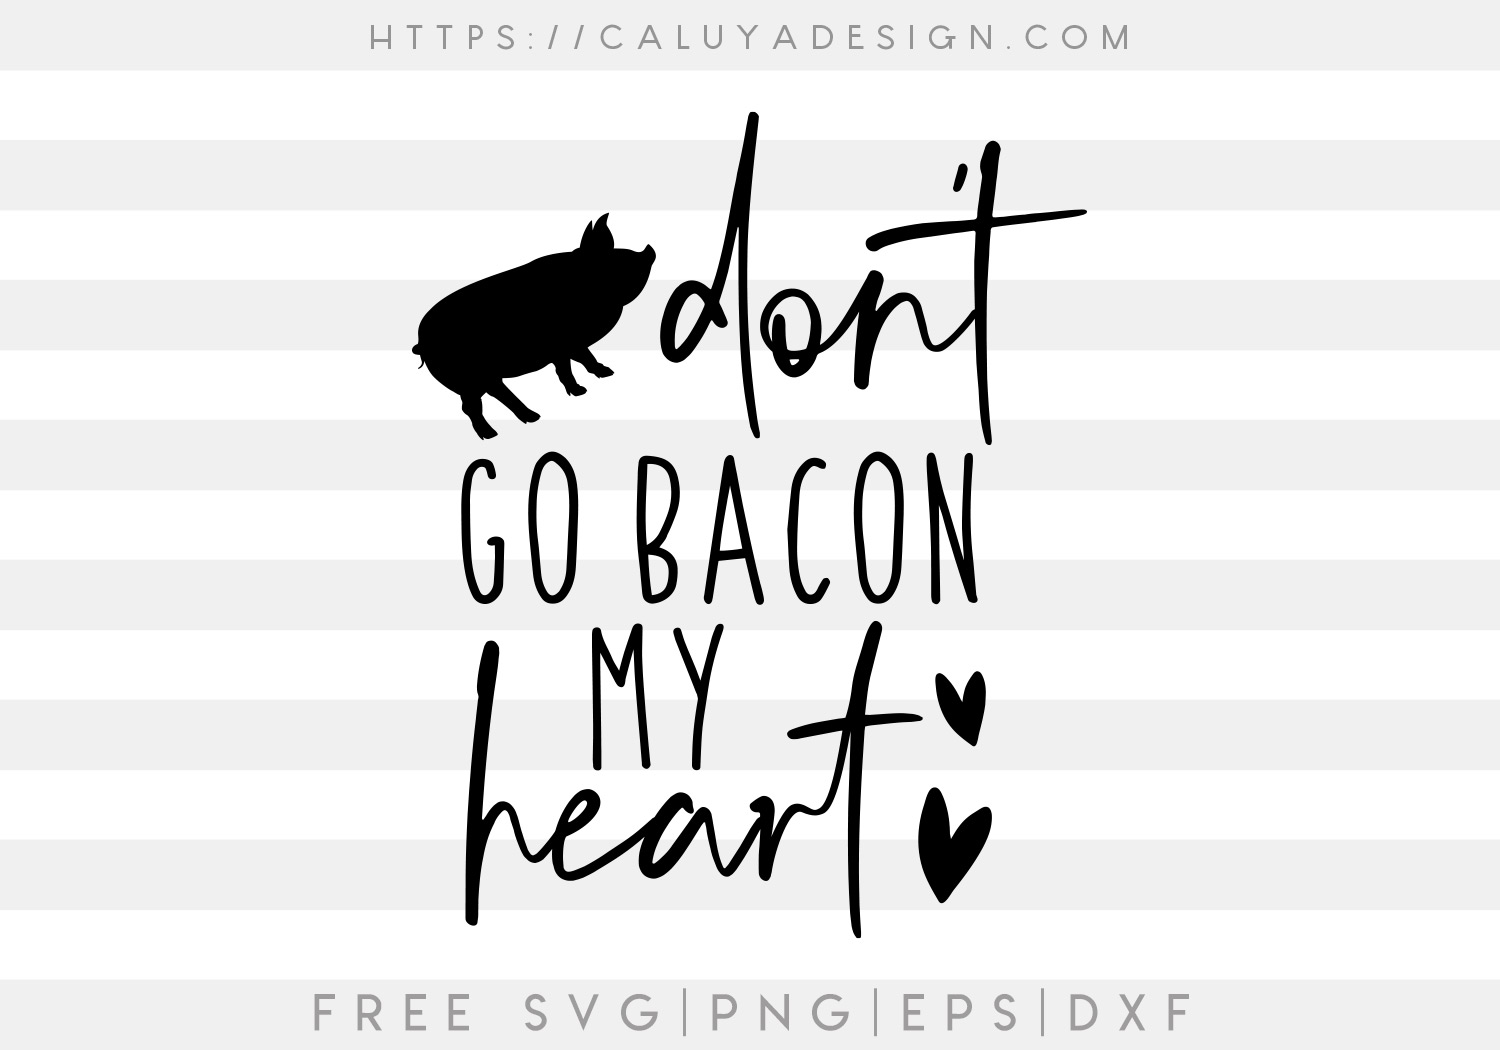 Free Don't Go Bacon My Heart SVG Cut File